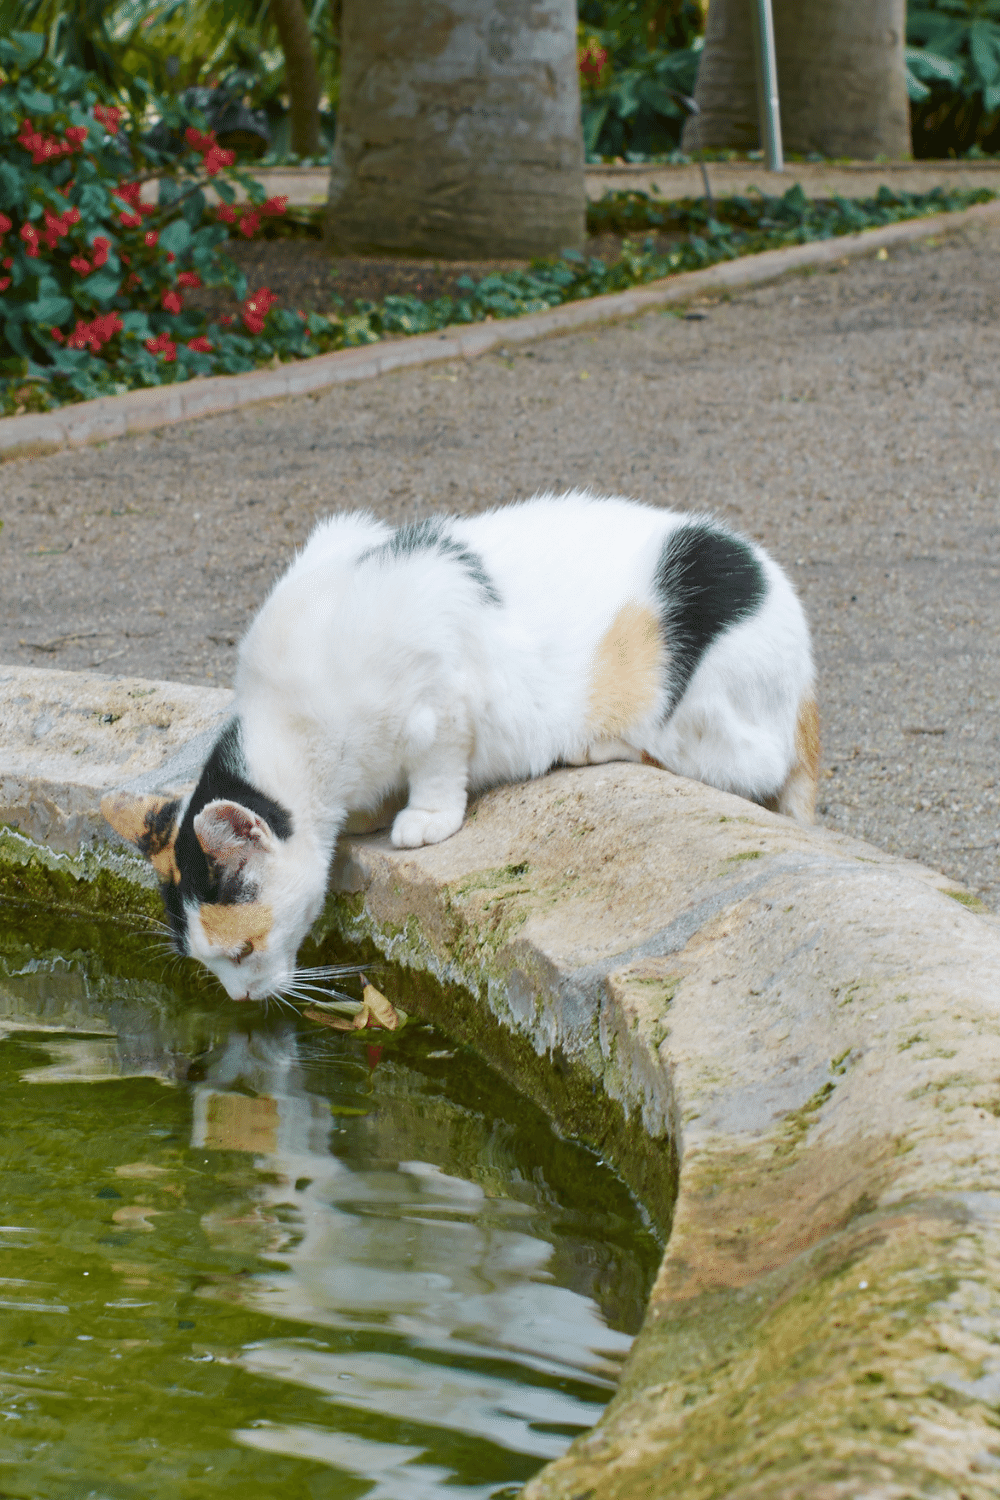 Stray Cats can Easily Drink Water from Puddles/Ponds